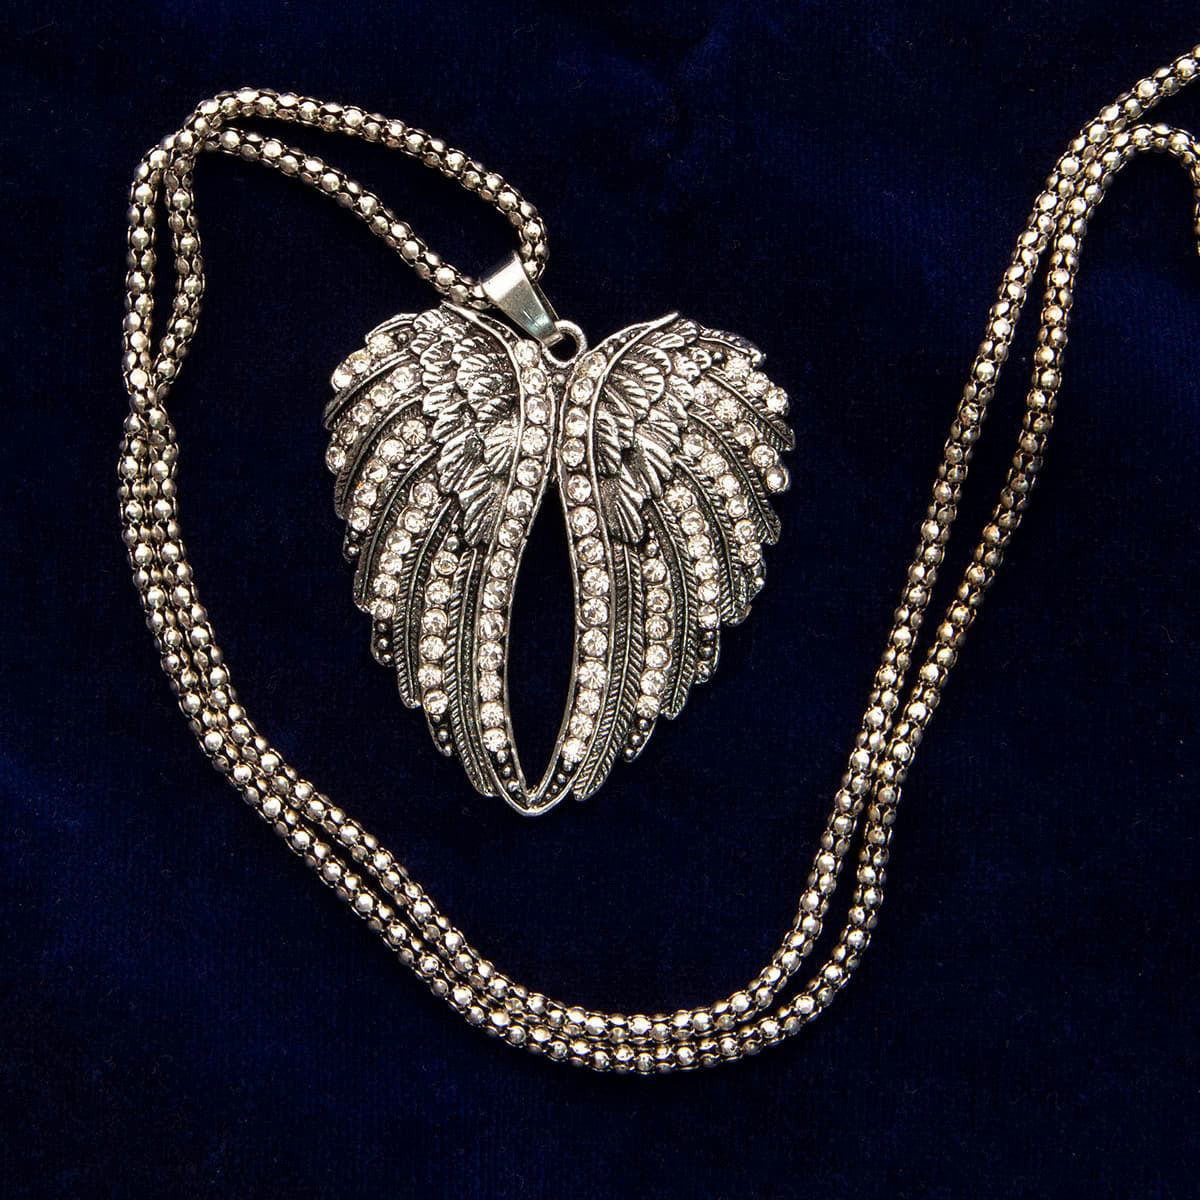 angel wings pendant has sparkling faux diamonds and hangs from a long, heavy silver finish chain